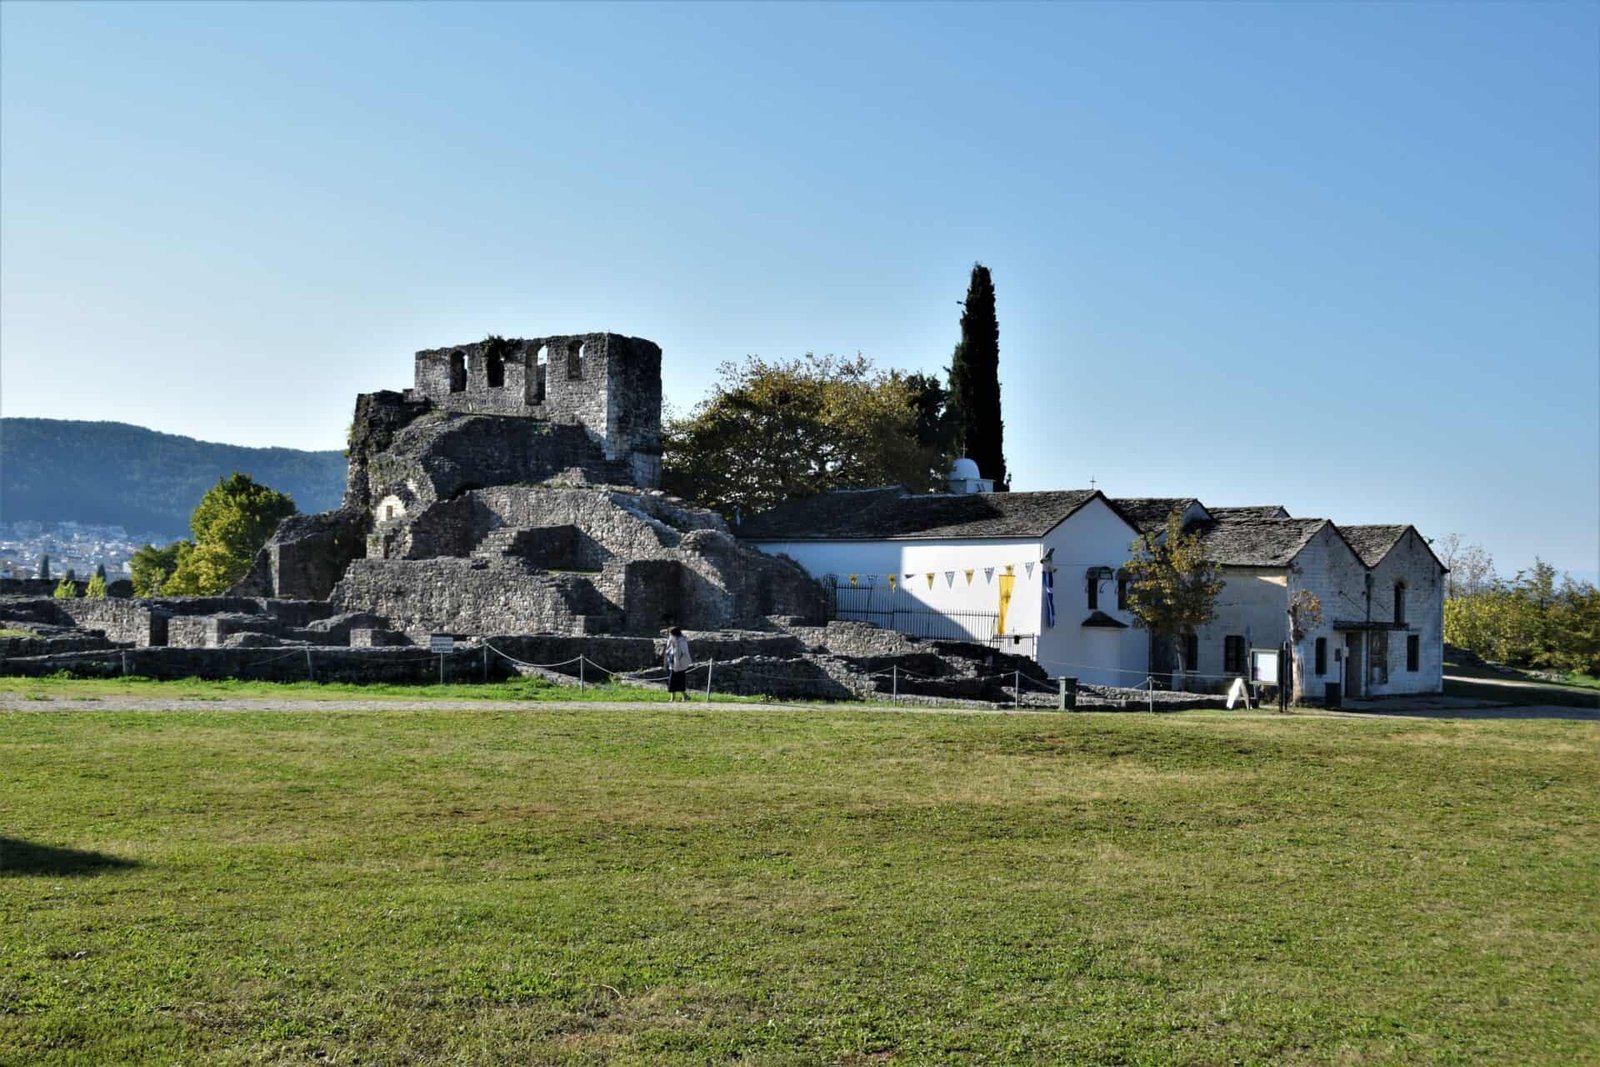 a green yard in front of the remains of a medieval tower next to a restored building complex with black slate-tiled roofs